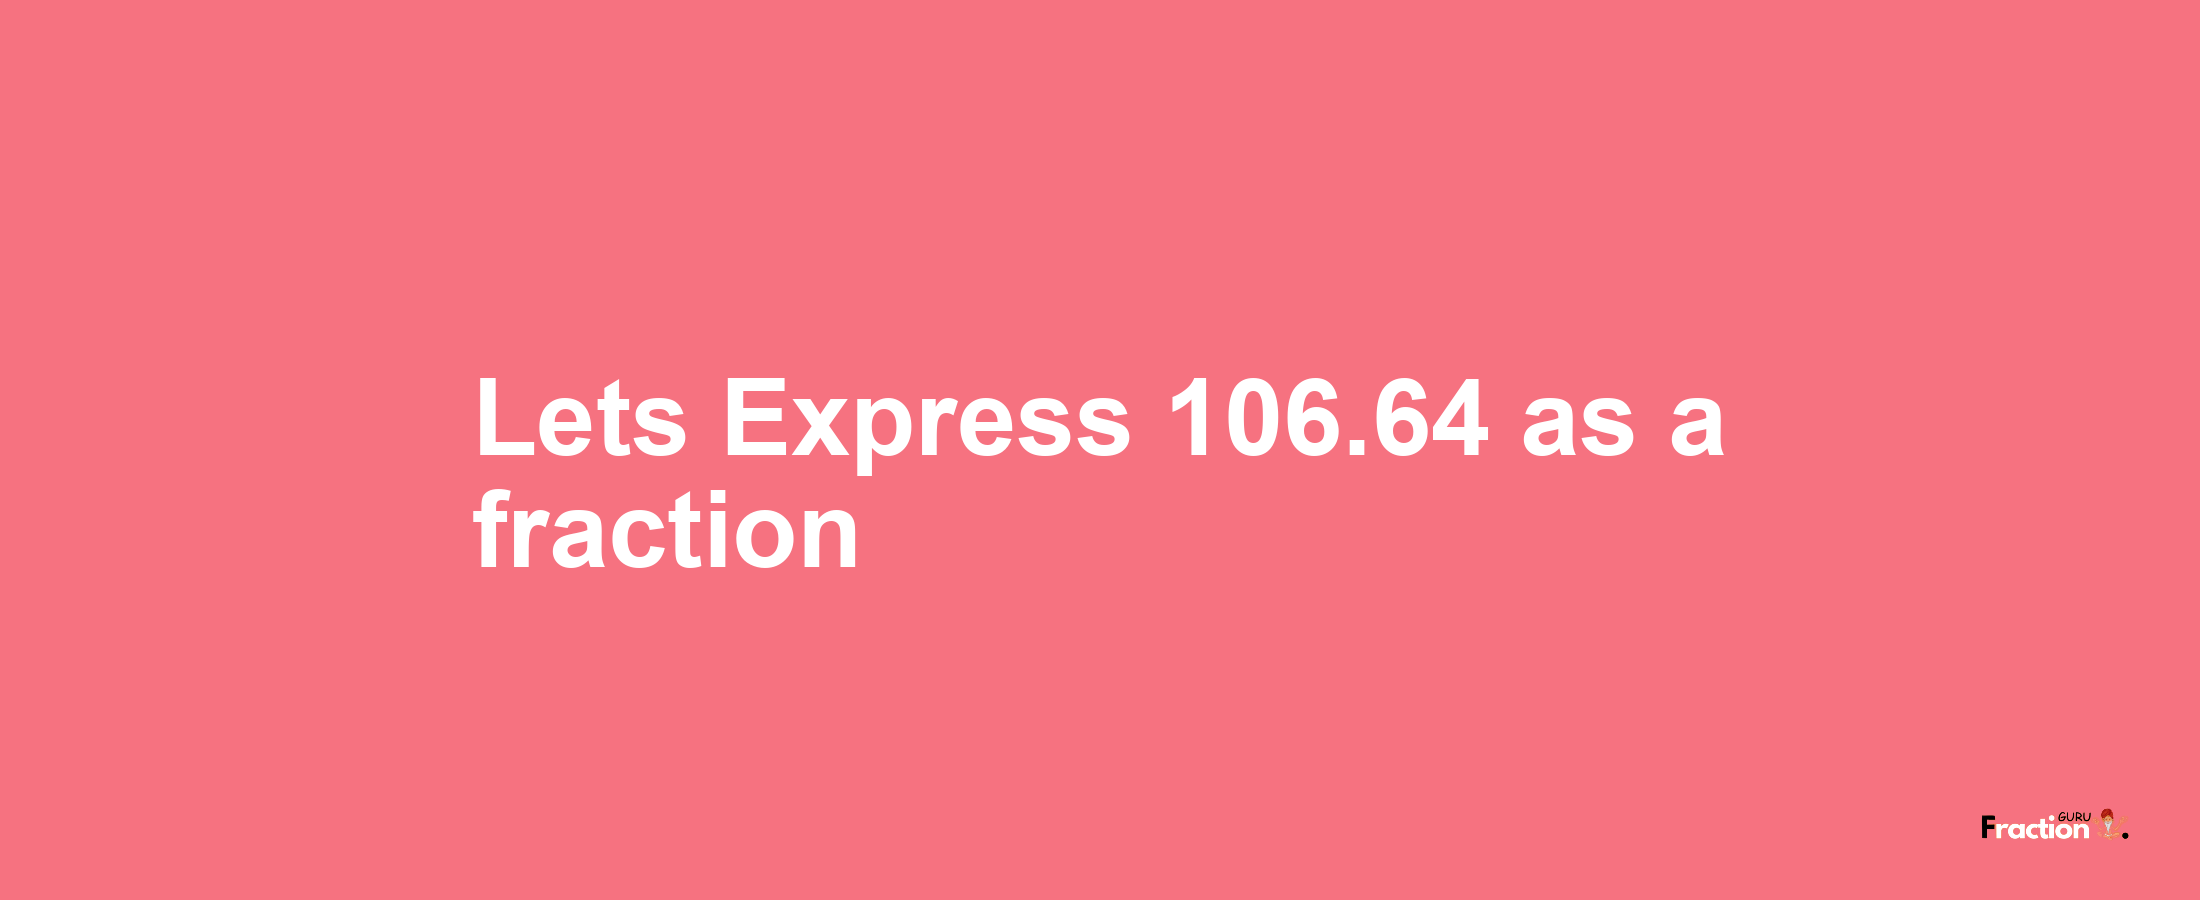 Lets Express 106.64 as afraction